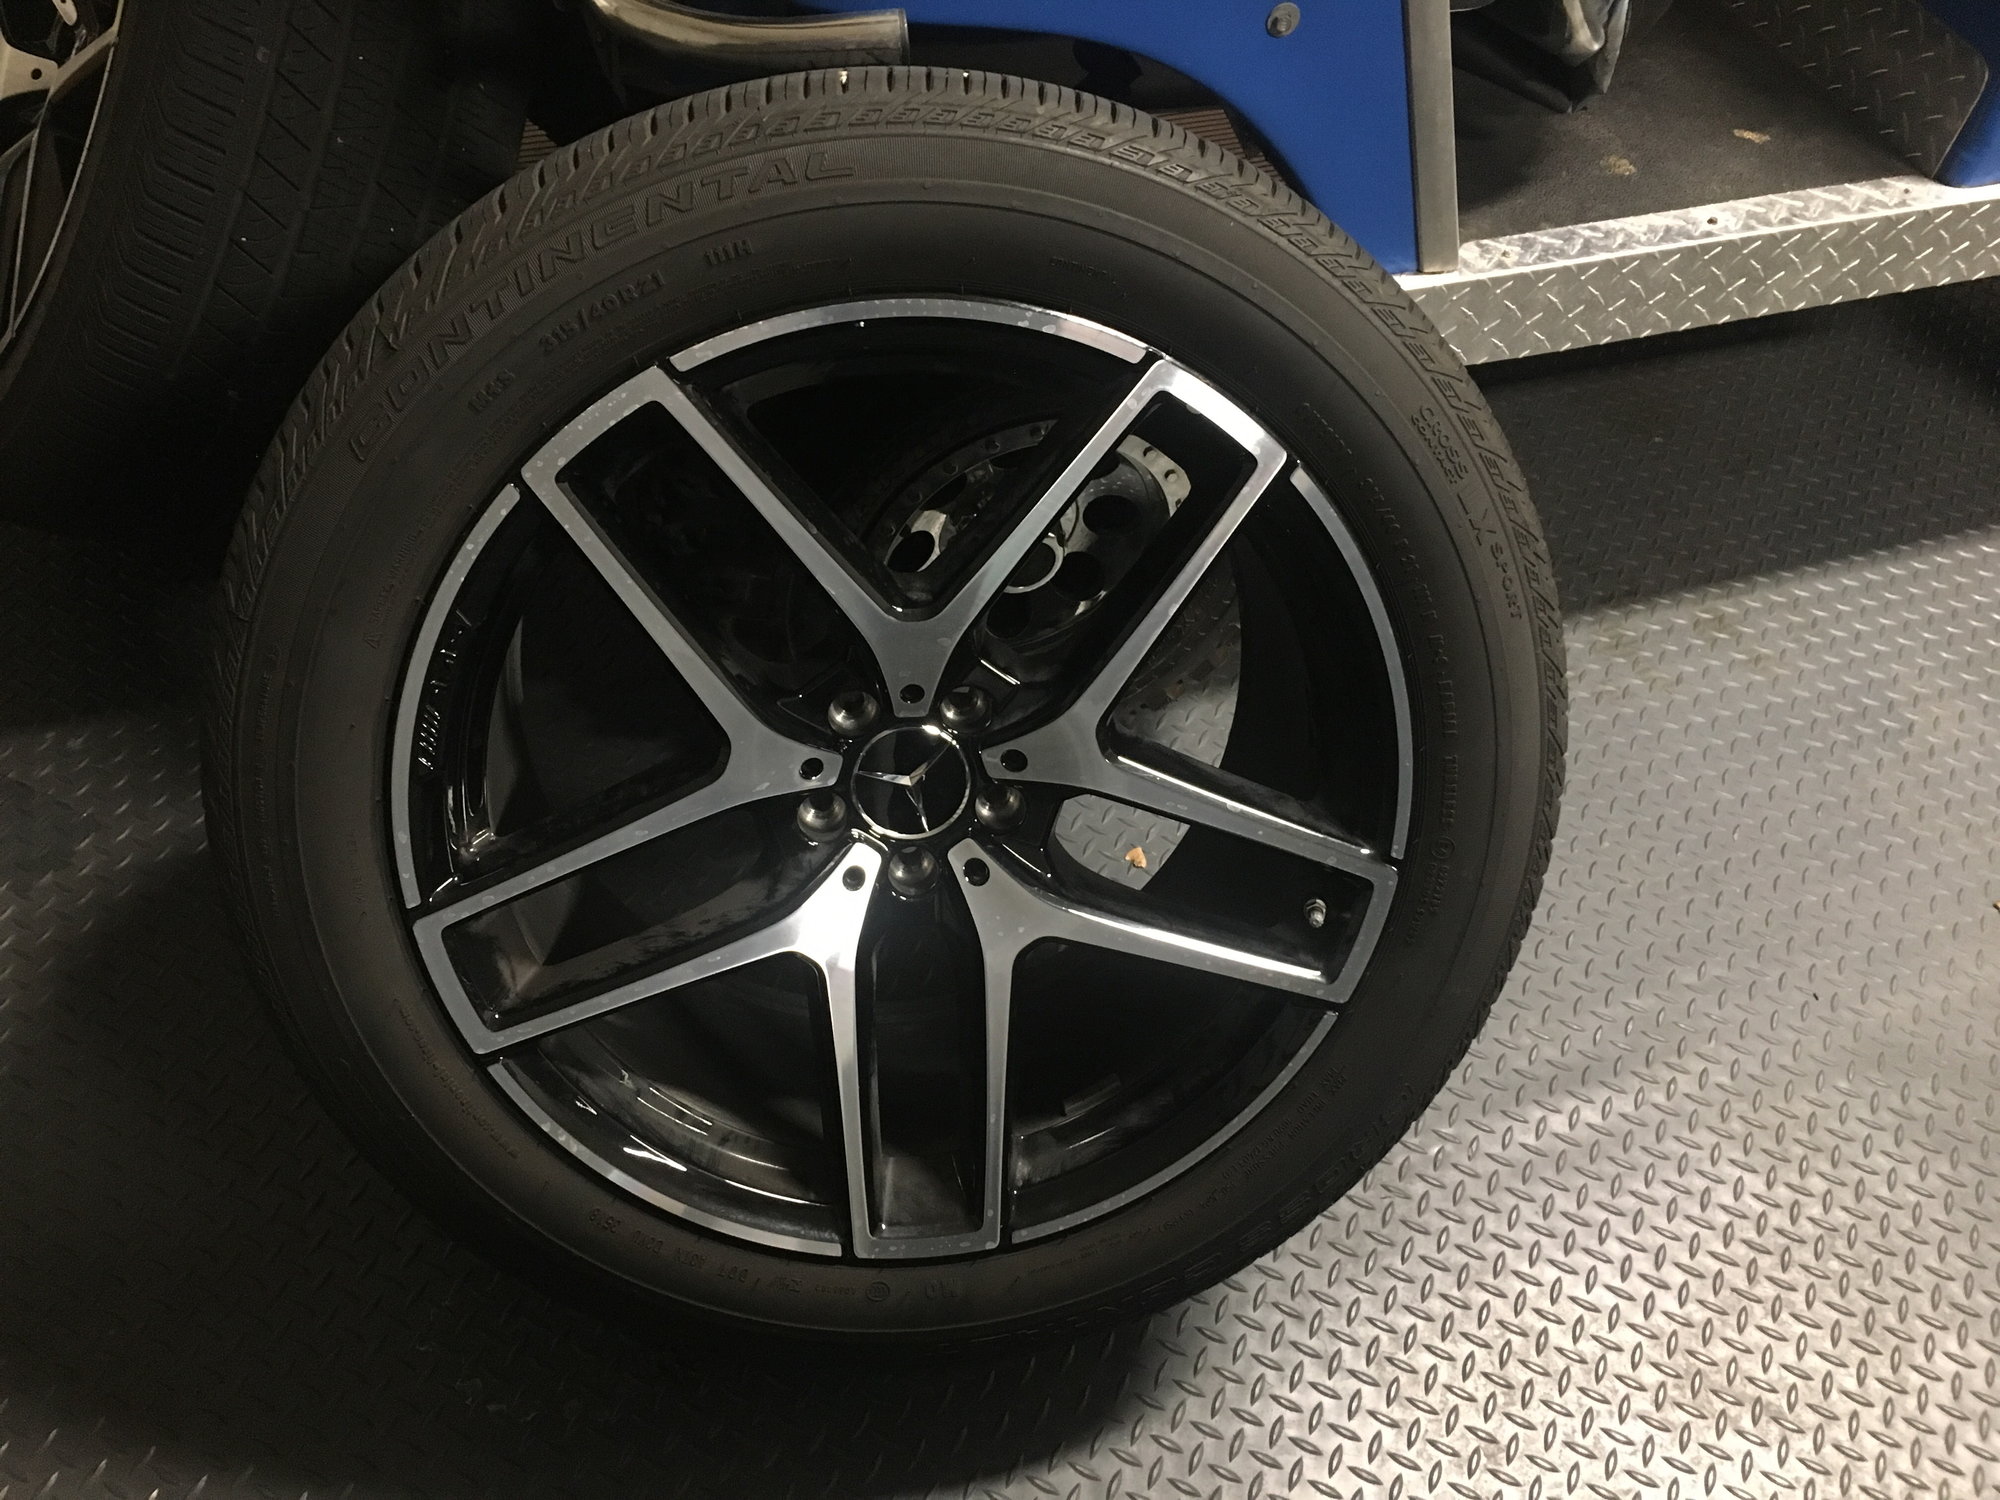 Wheels and Tires/Axles - 2018 GLE 43 Coupe 21" 5 Spoke OE Wheels - Used - 2016 to 2019 Mercedes-Benz GLE43 AMG - 2016 to 2019 Mercedes-Benz GLE63 AMG - 2015 to 2017 Mercedes-Benz GLE450 AMG - Austin, TX 78734, United States